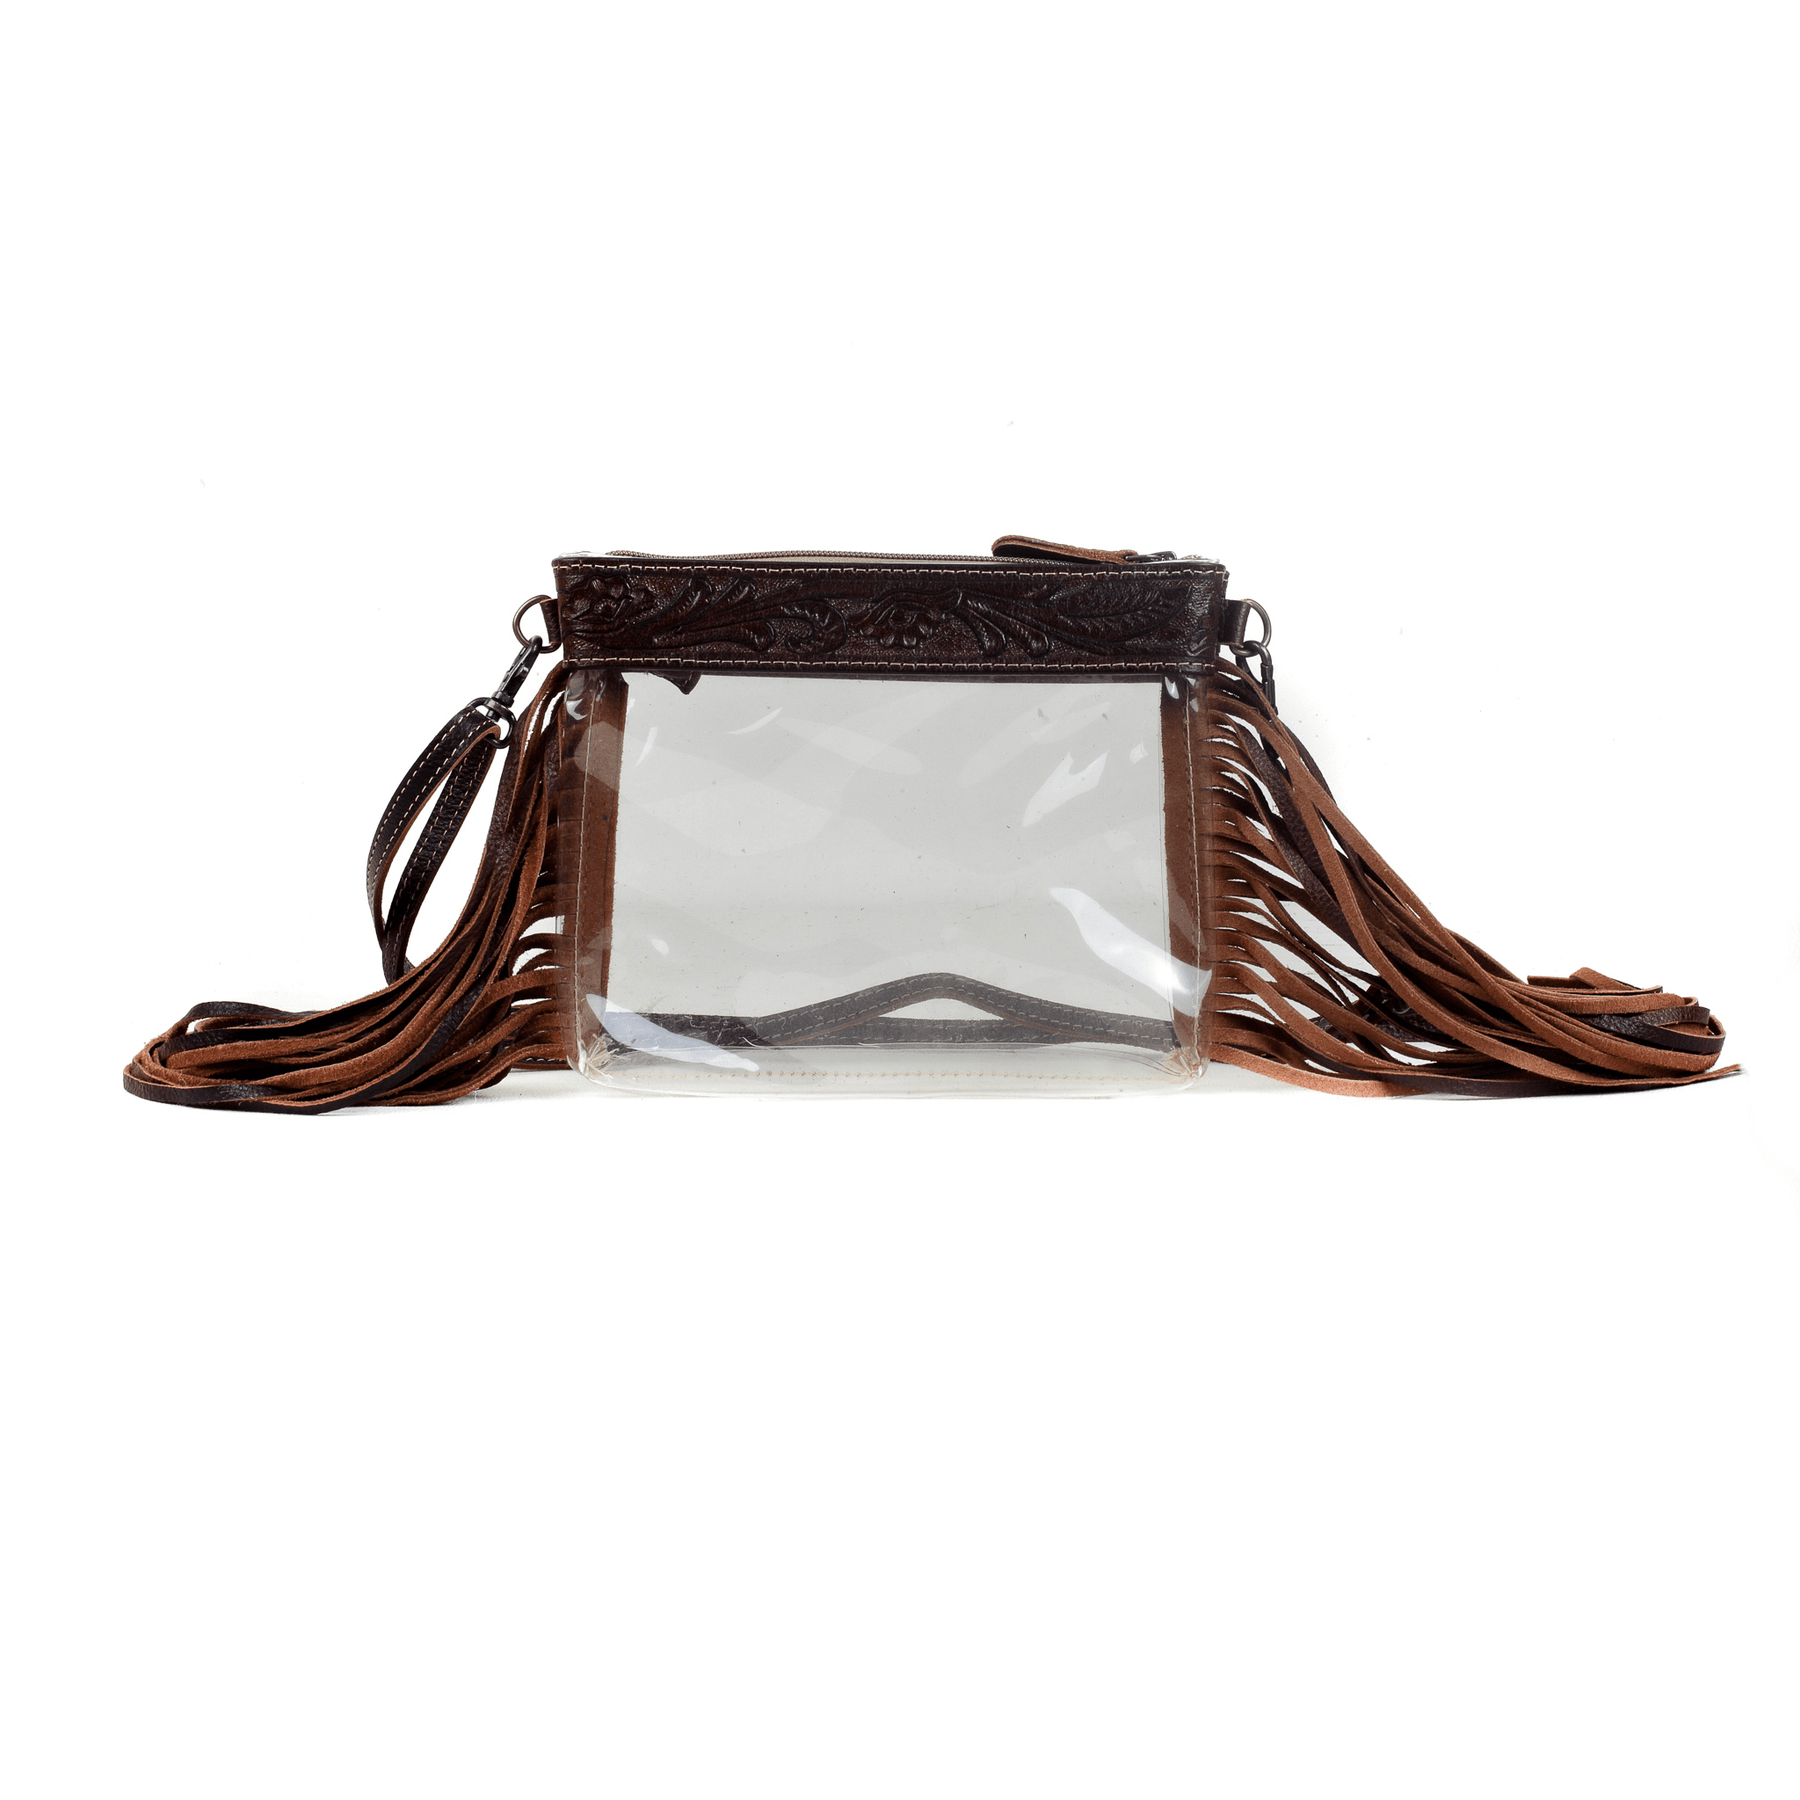 Western Fringe Wallet or Small Purse